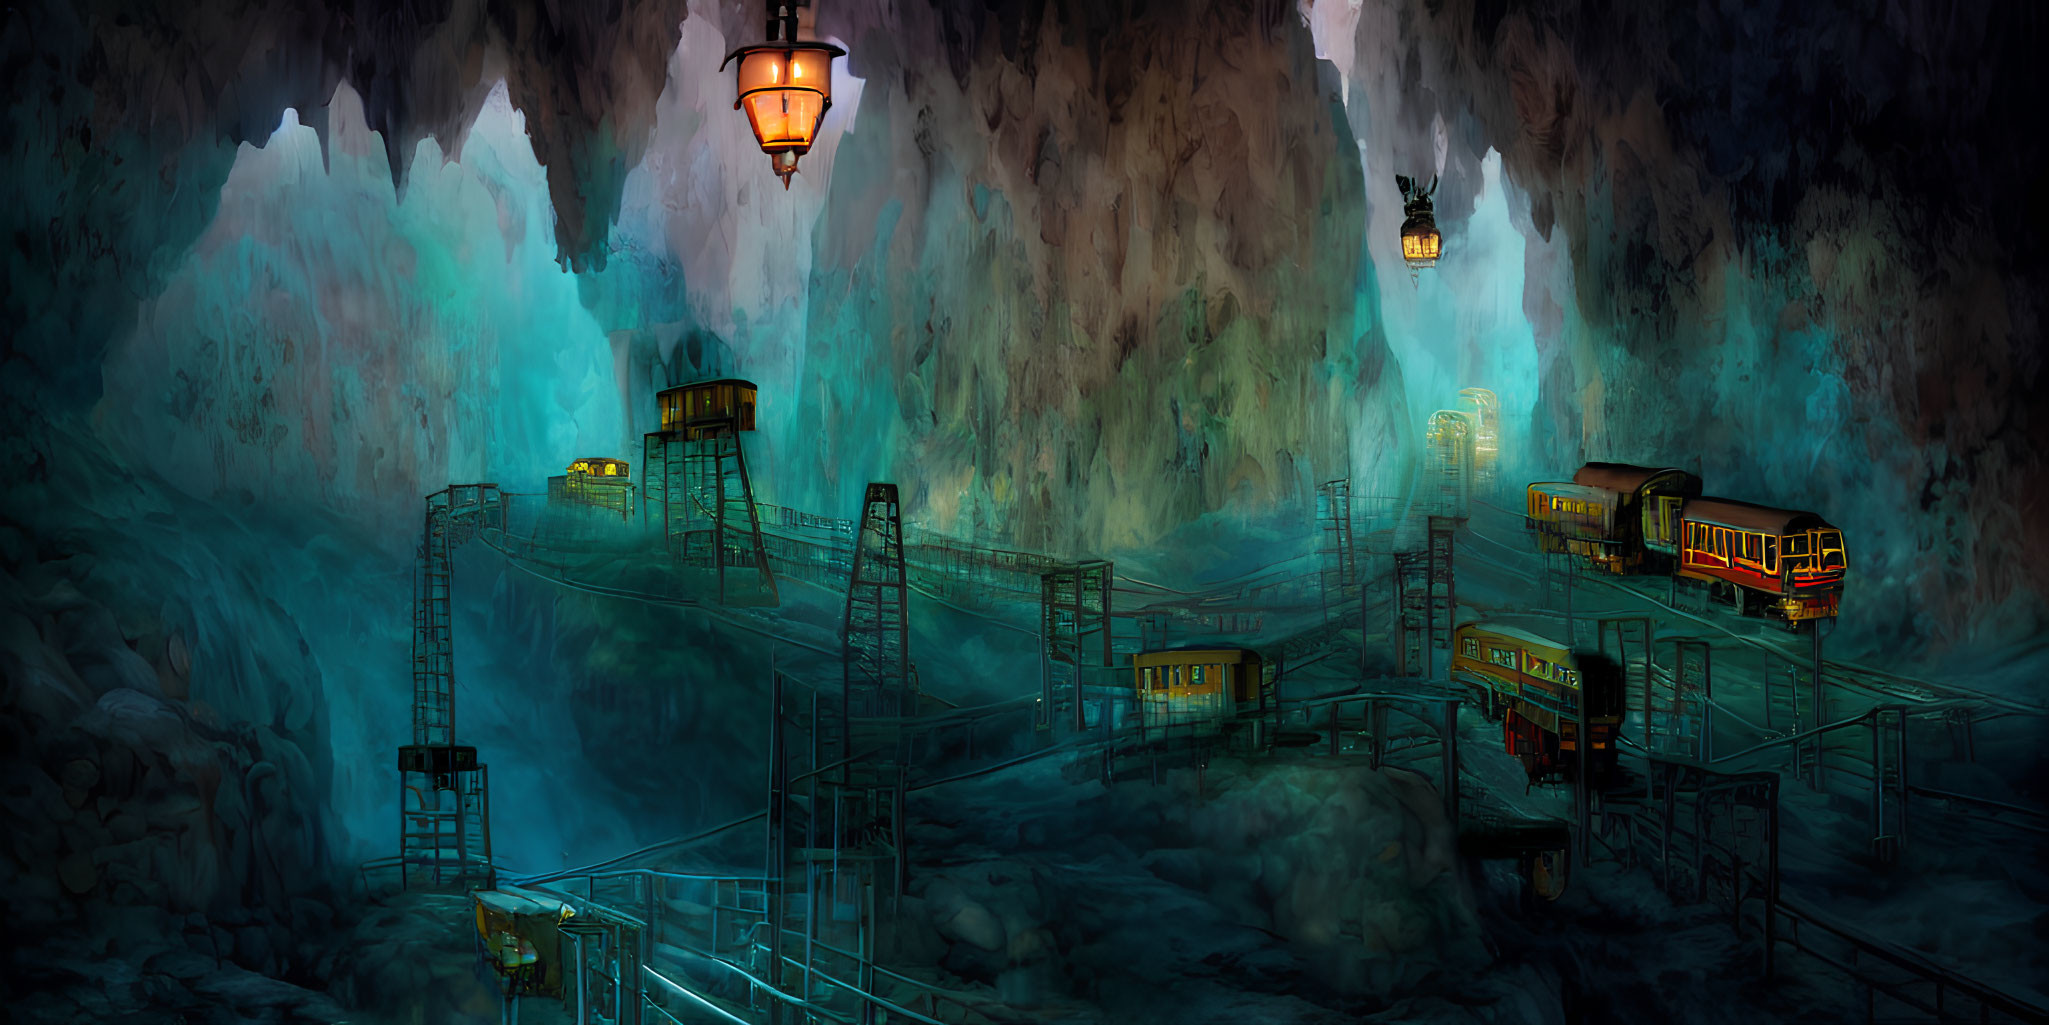 Illustration of cavern with glowing blue walls, wooden platforms, staircases, lanterns, and mining